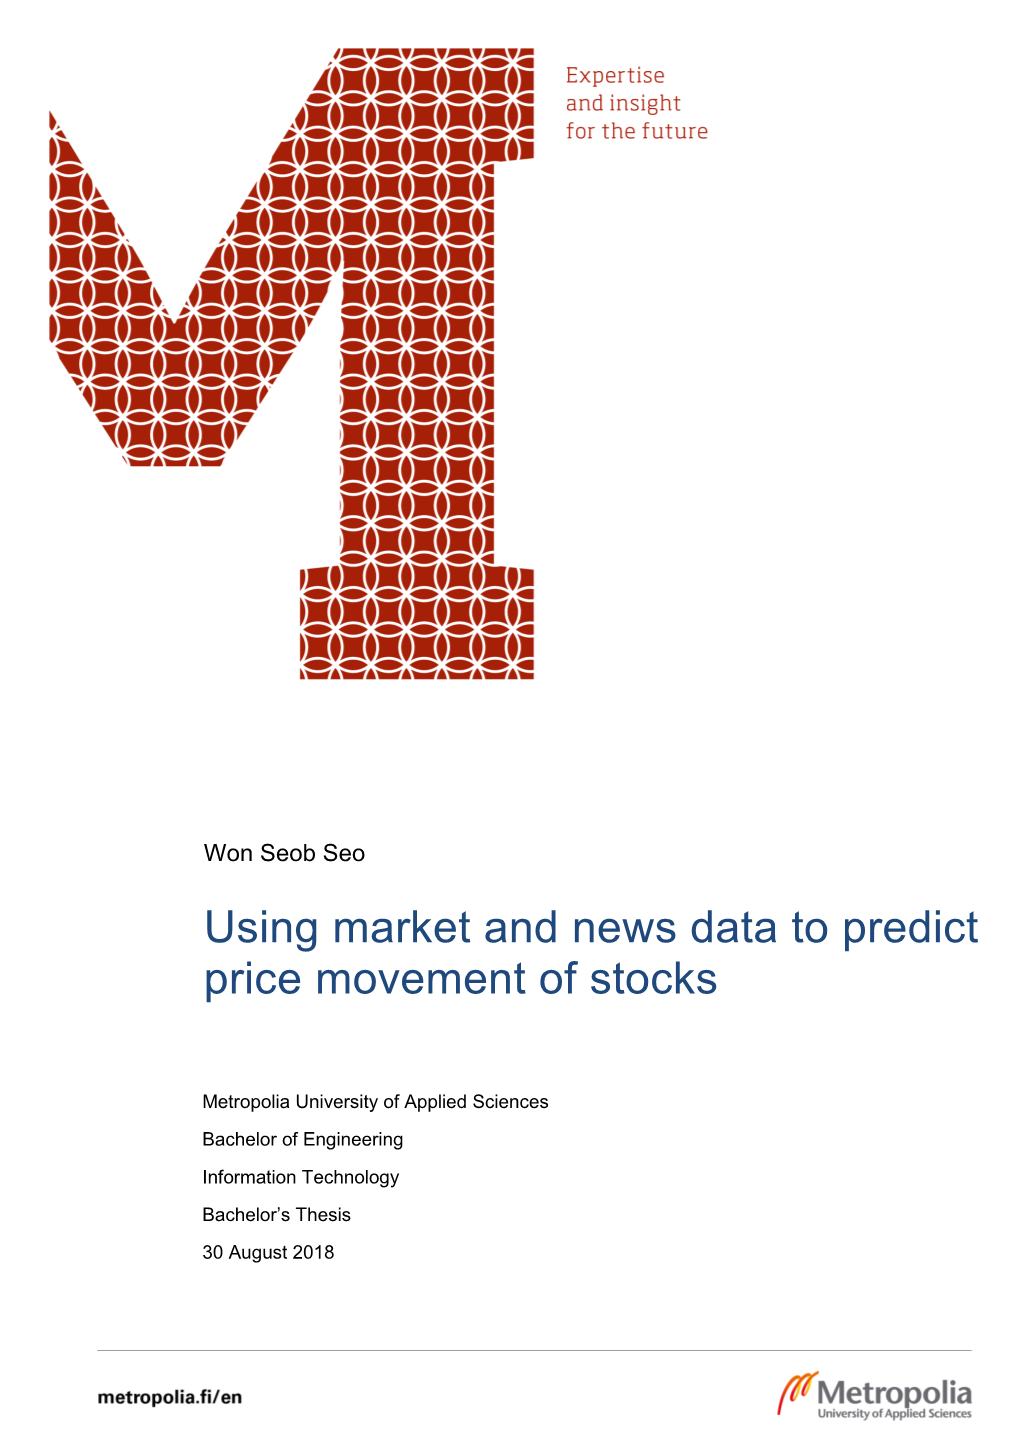 Using Market and News Data to Predict Price Movement of Stocks